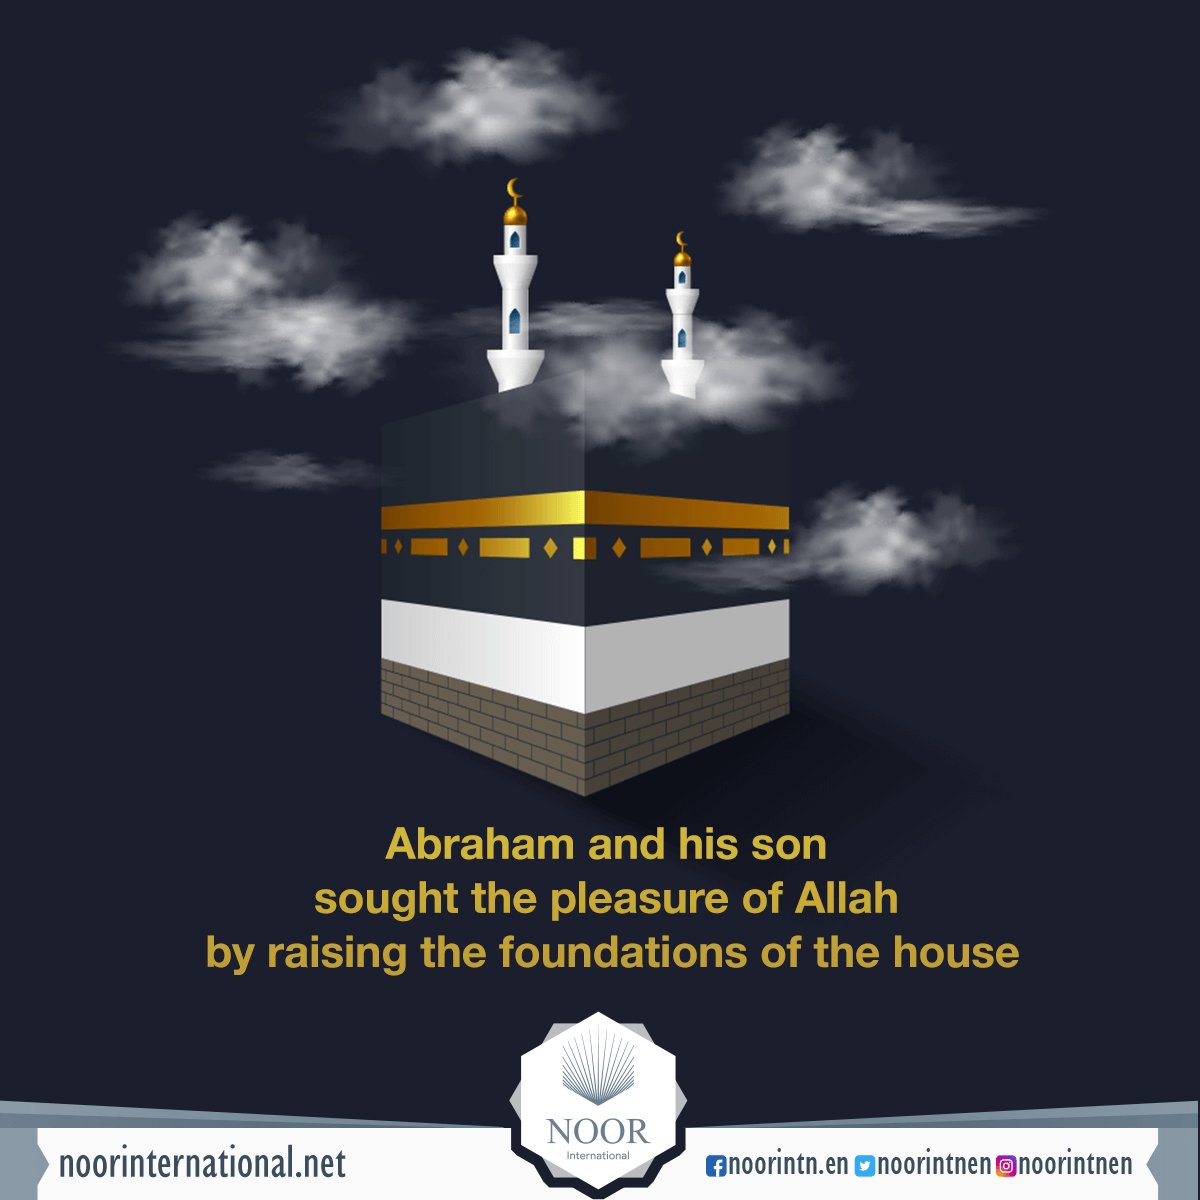 Abraham and his son sought the pleasure of Allah by raising the foundations of the house